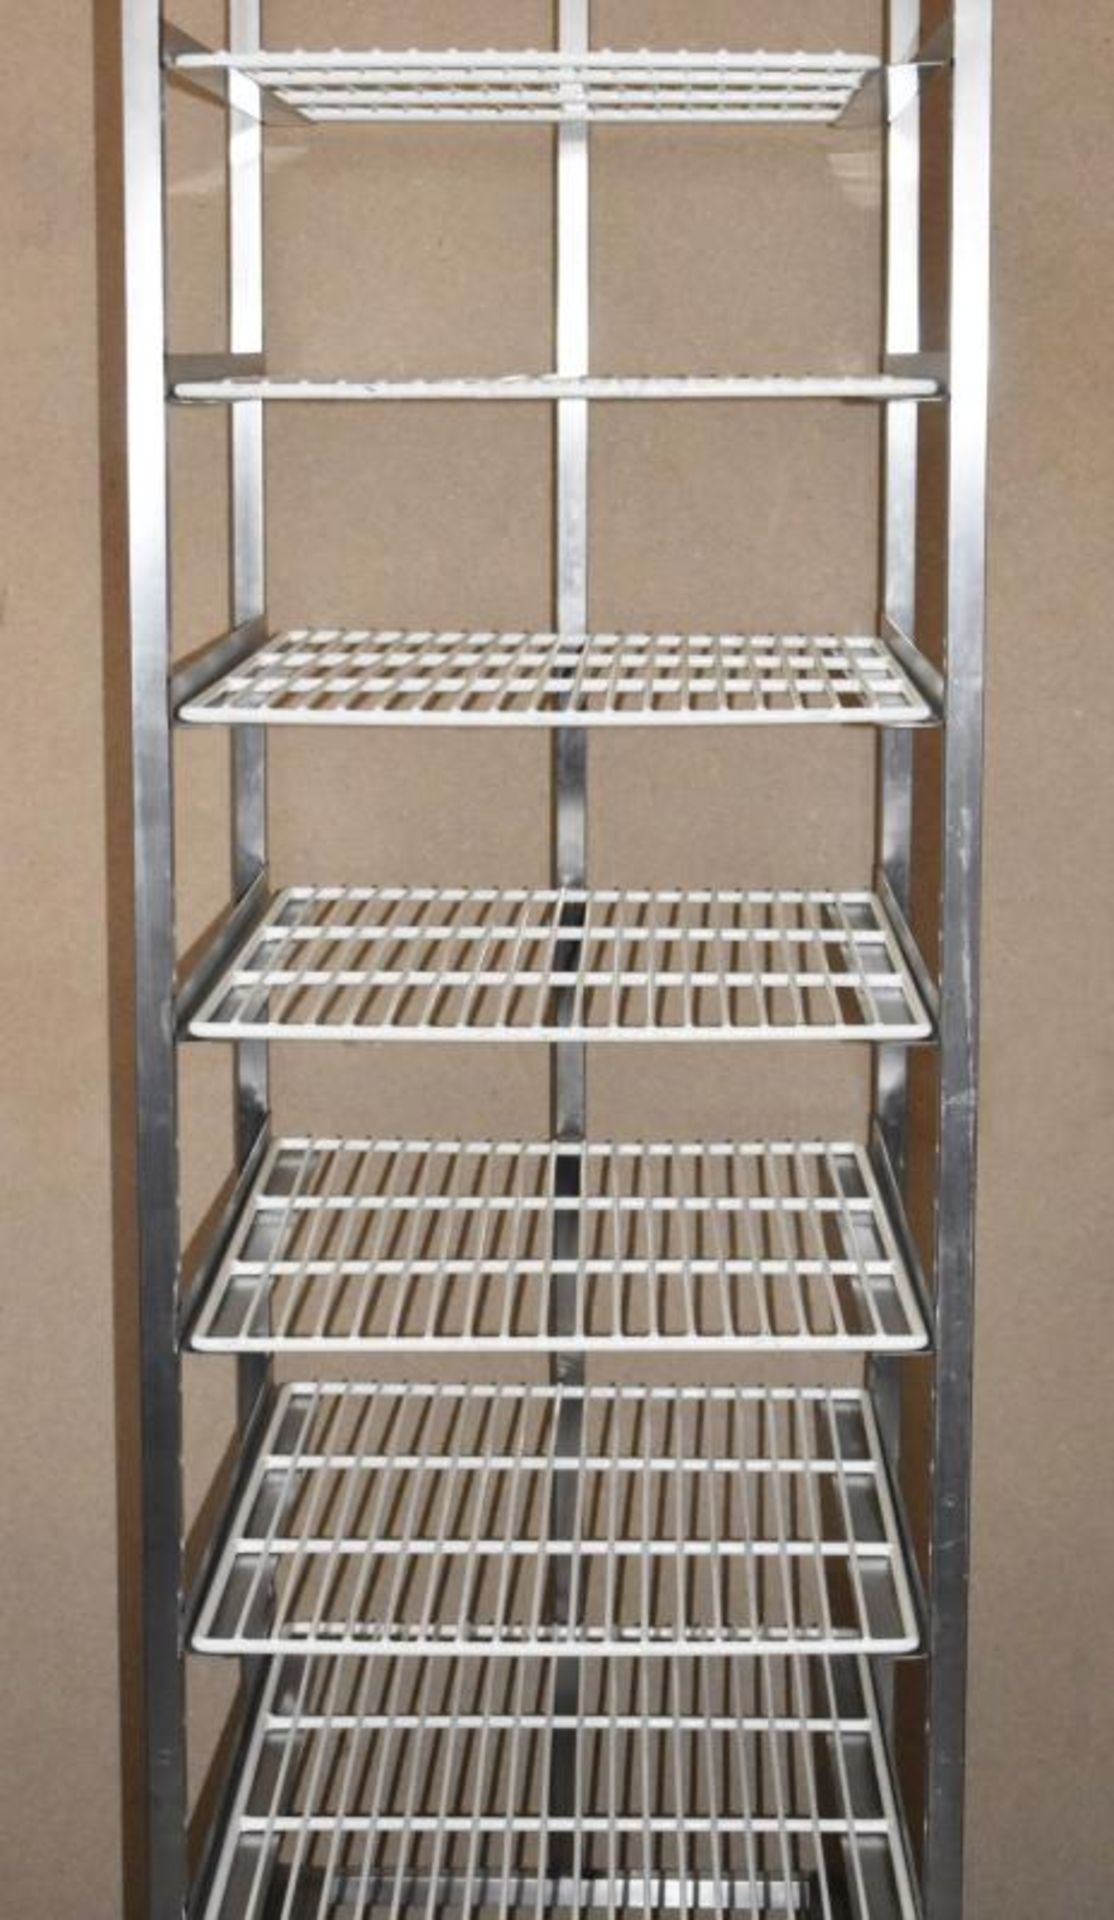 1 x Stainless Steel 8 Tier Mobile Shelf Unit For Commercial Kitchens With White Coated Wire Shelves - Image 6 of 11